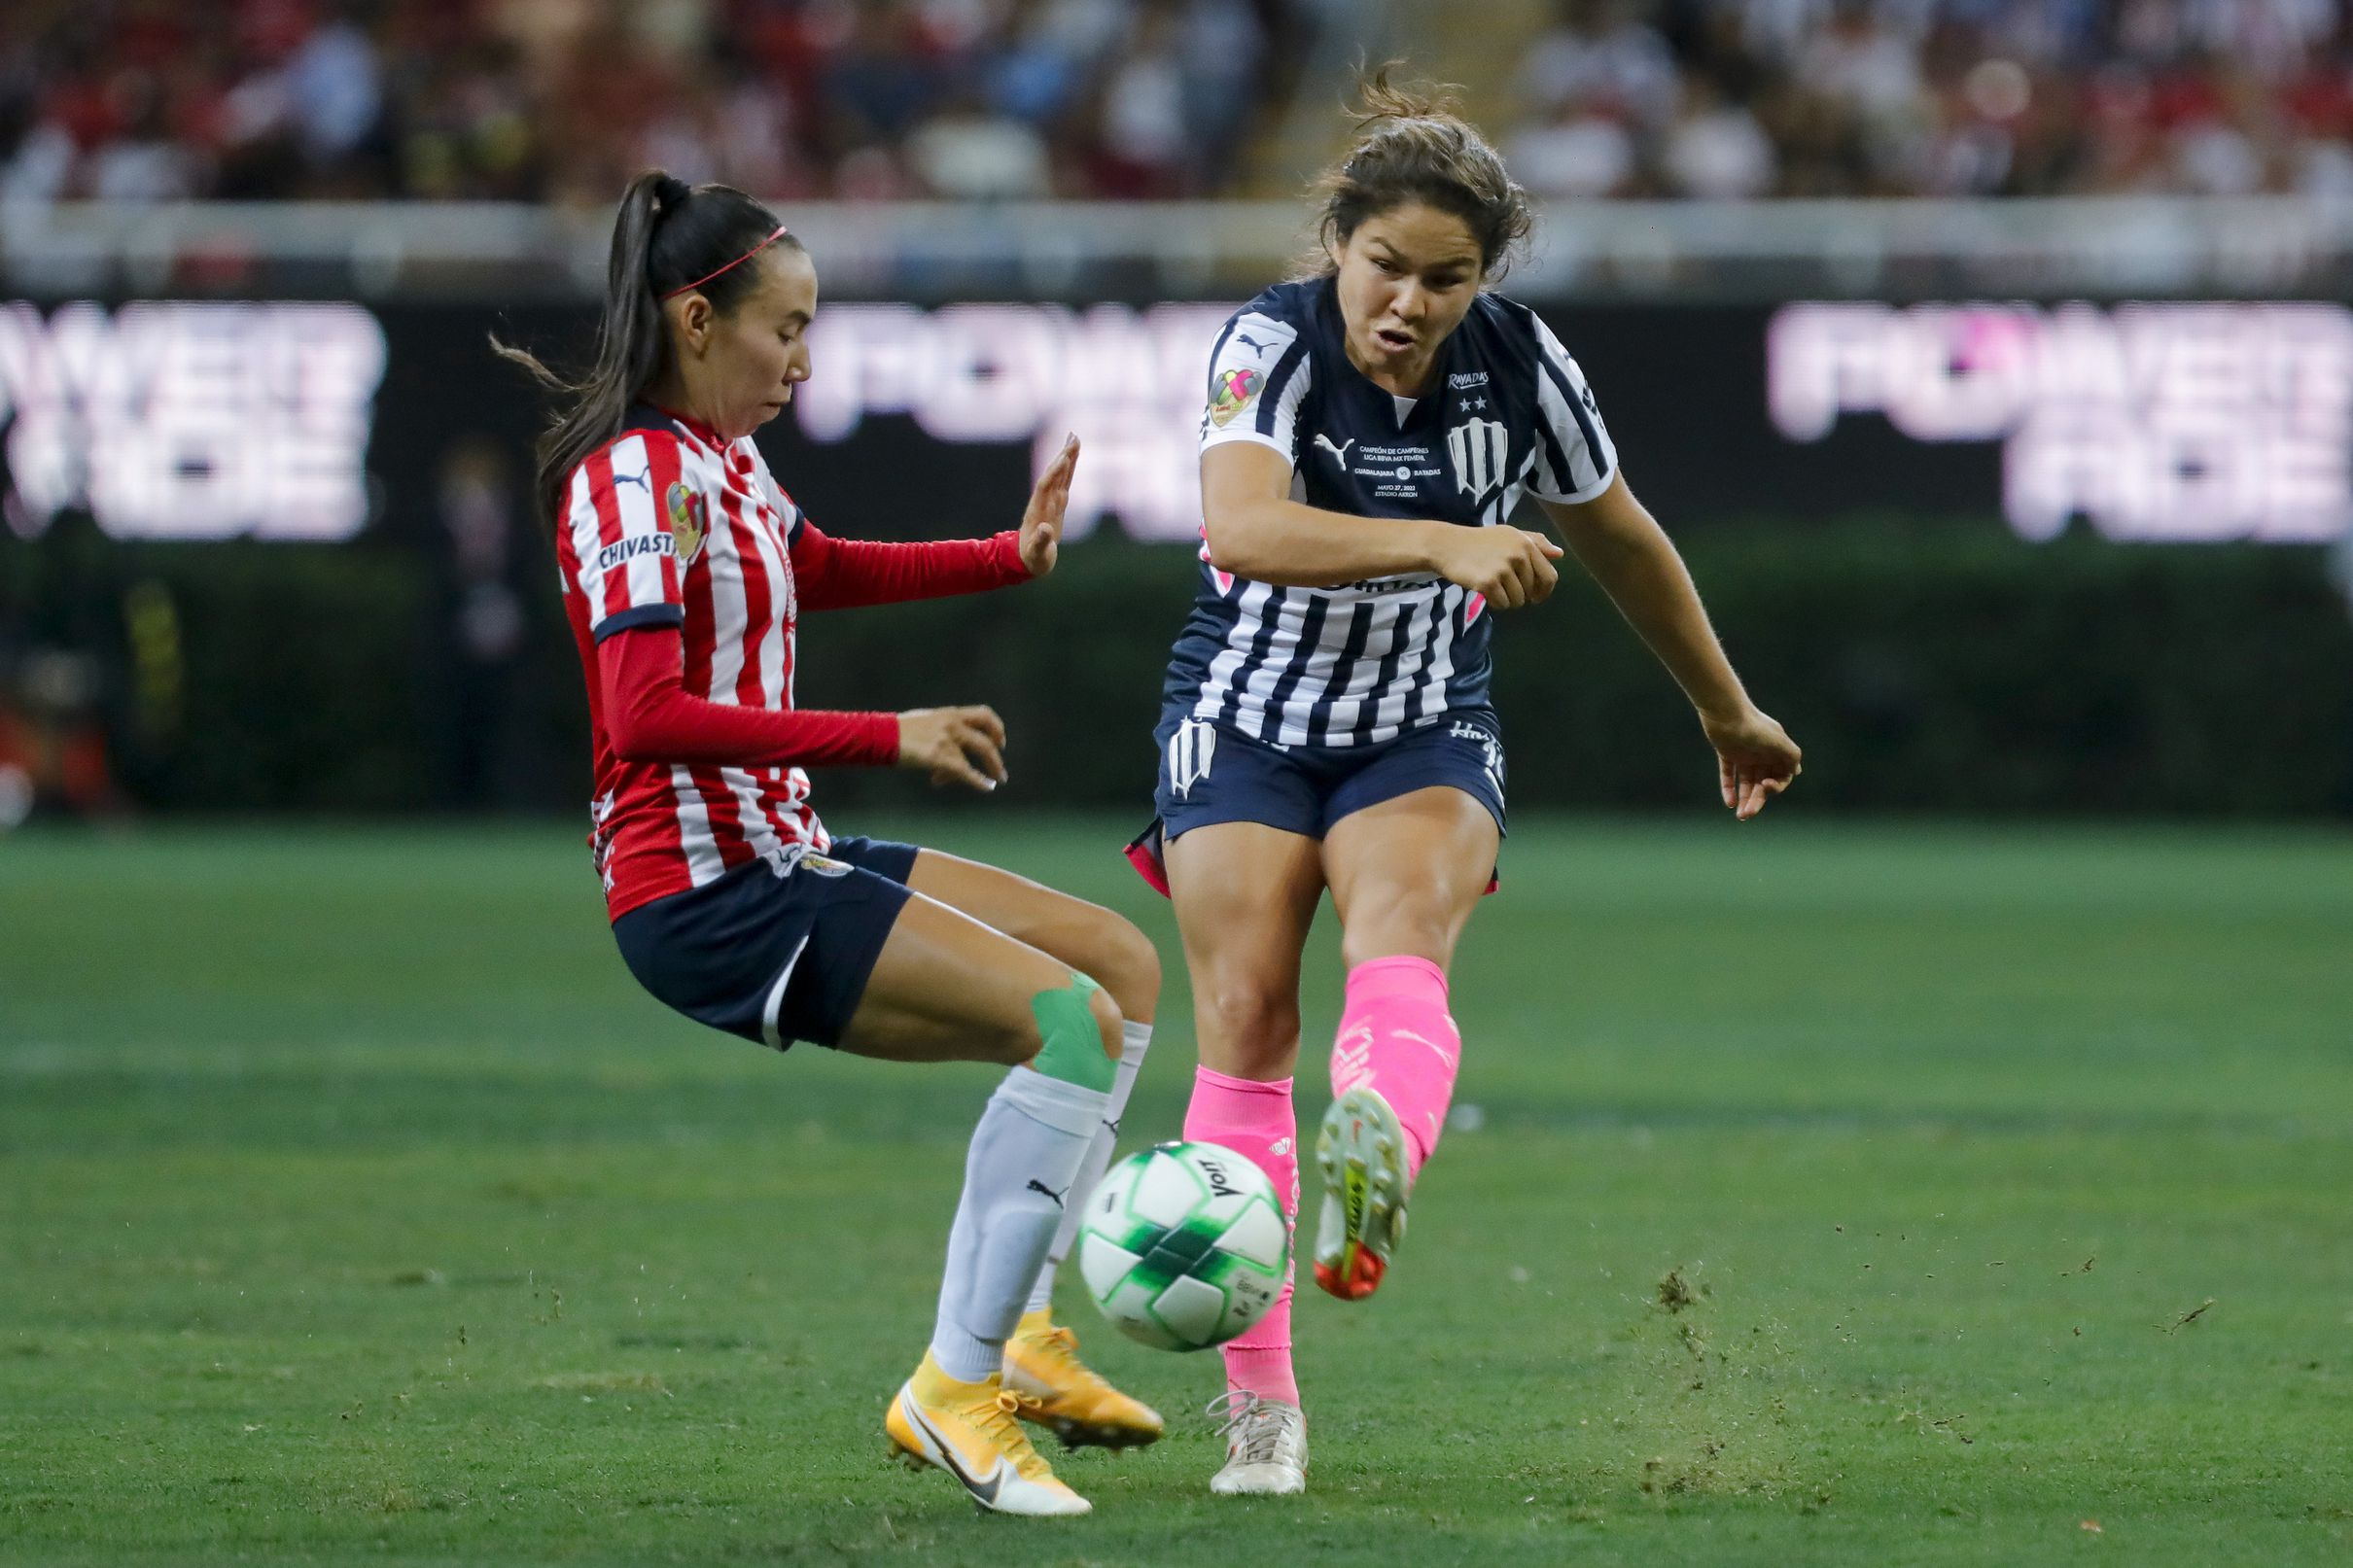 Gabriela Valenzuela of Chivas fights for the ball with Valeria Valdez of Monterrey during the final first leg match between Chivas and Monterrey as part of Campeon de Campeones 2022 Liga MX Femenil at Akron Stadium on May 27, 2022 in Zapopan, Mexico.